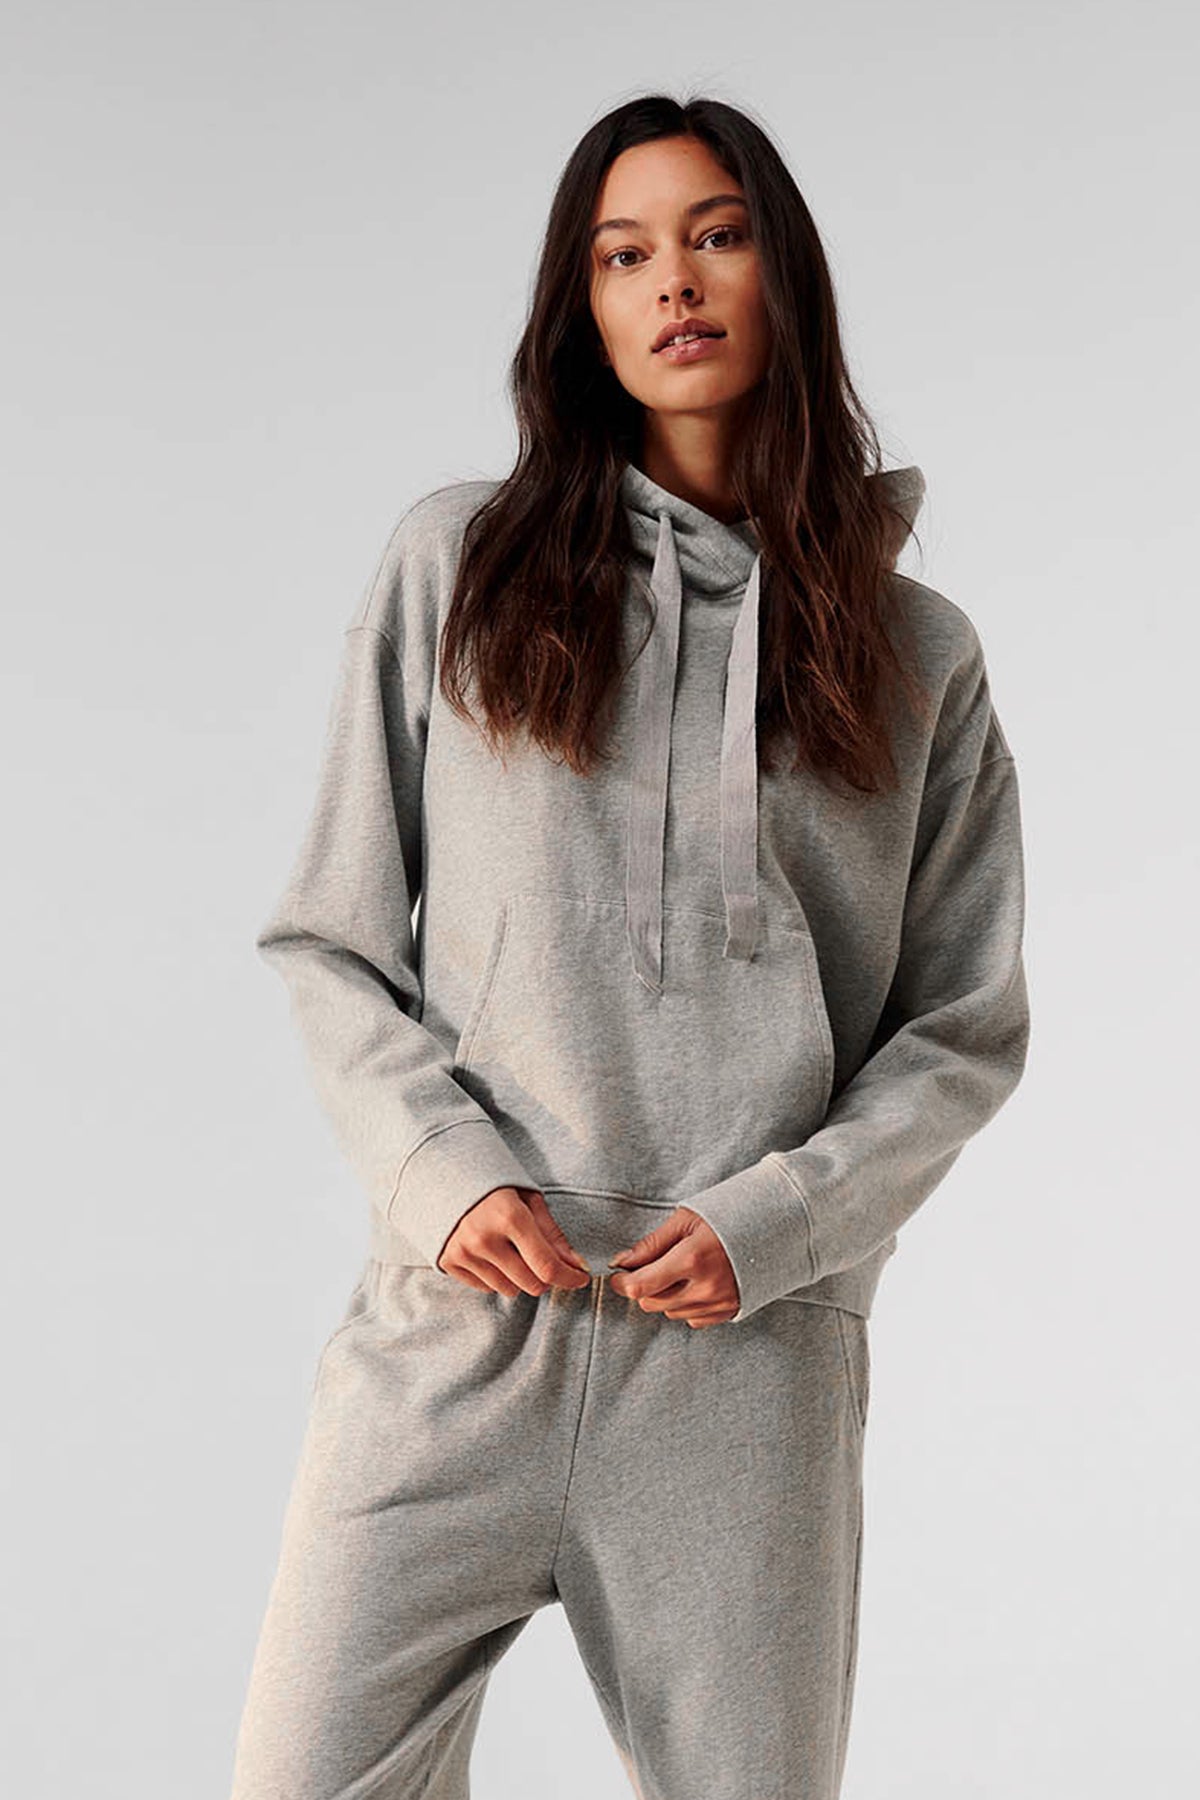 ojai hoodie heather grey front and zuma pant heather grey front-35490668576961